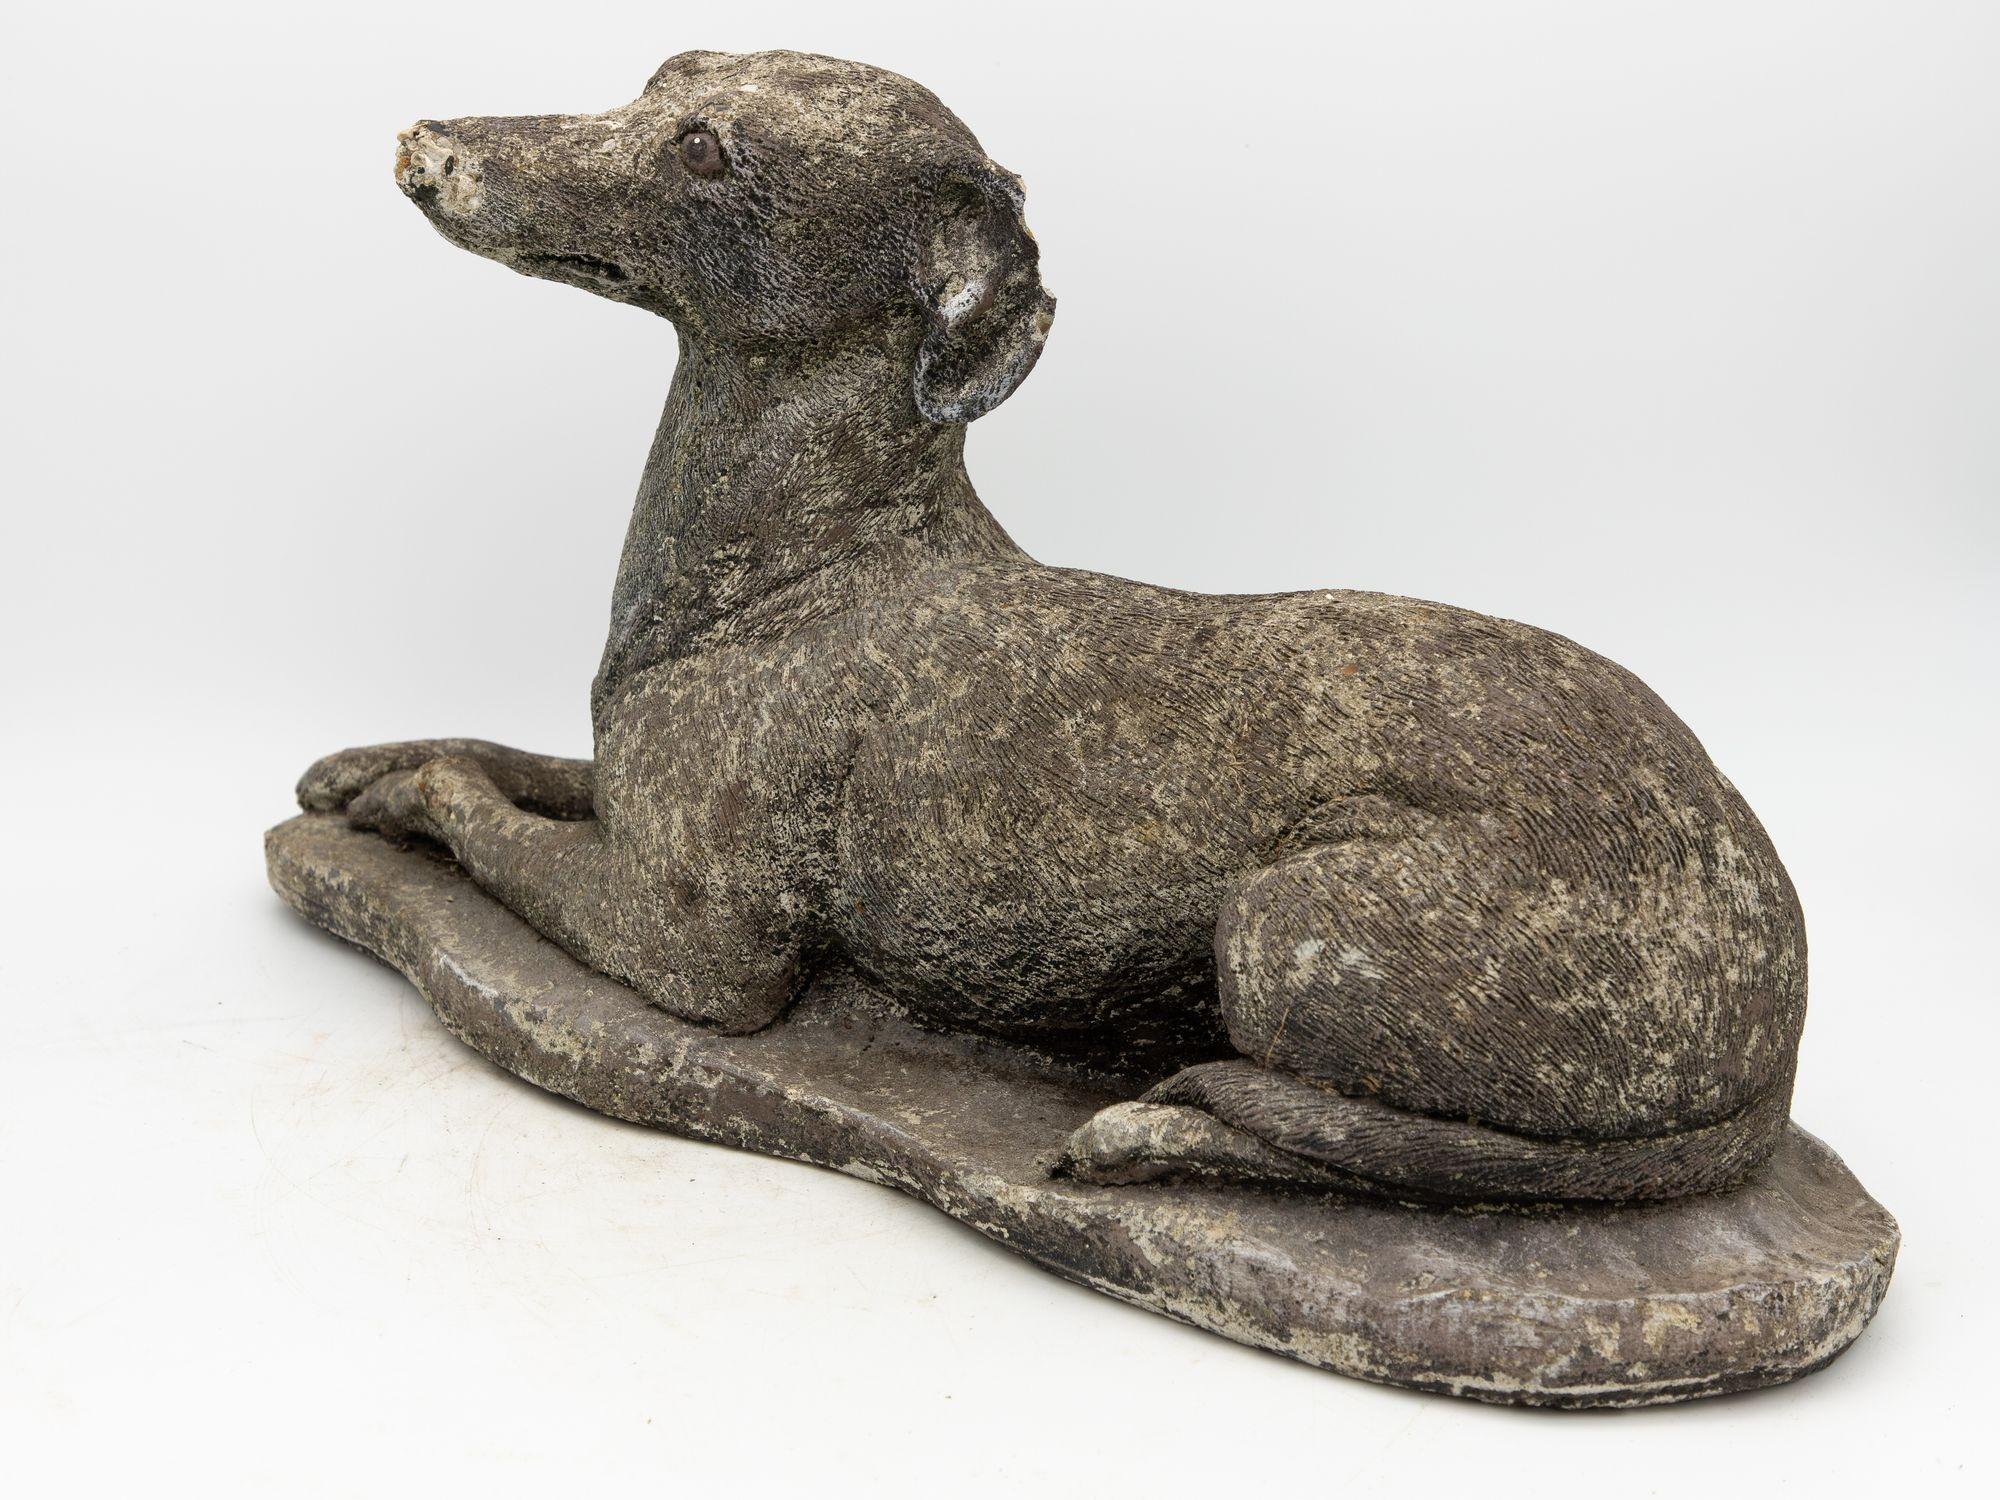 This exquisite garden ornament is a captivating portrayal of a recumbent whippet, epitomizing grace and charm. Crafted with meticulous attention to detail, the sculpture captures the whippet's serene repose, its slender body elegantly stretched out.